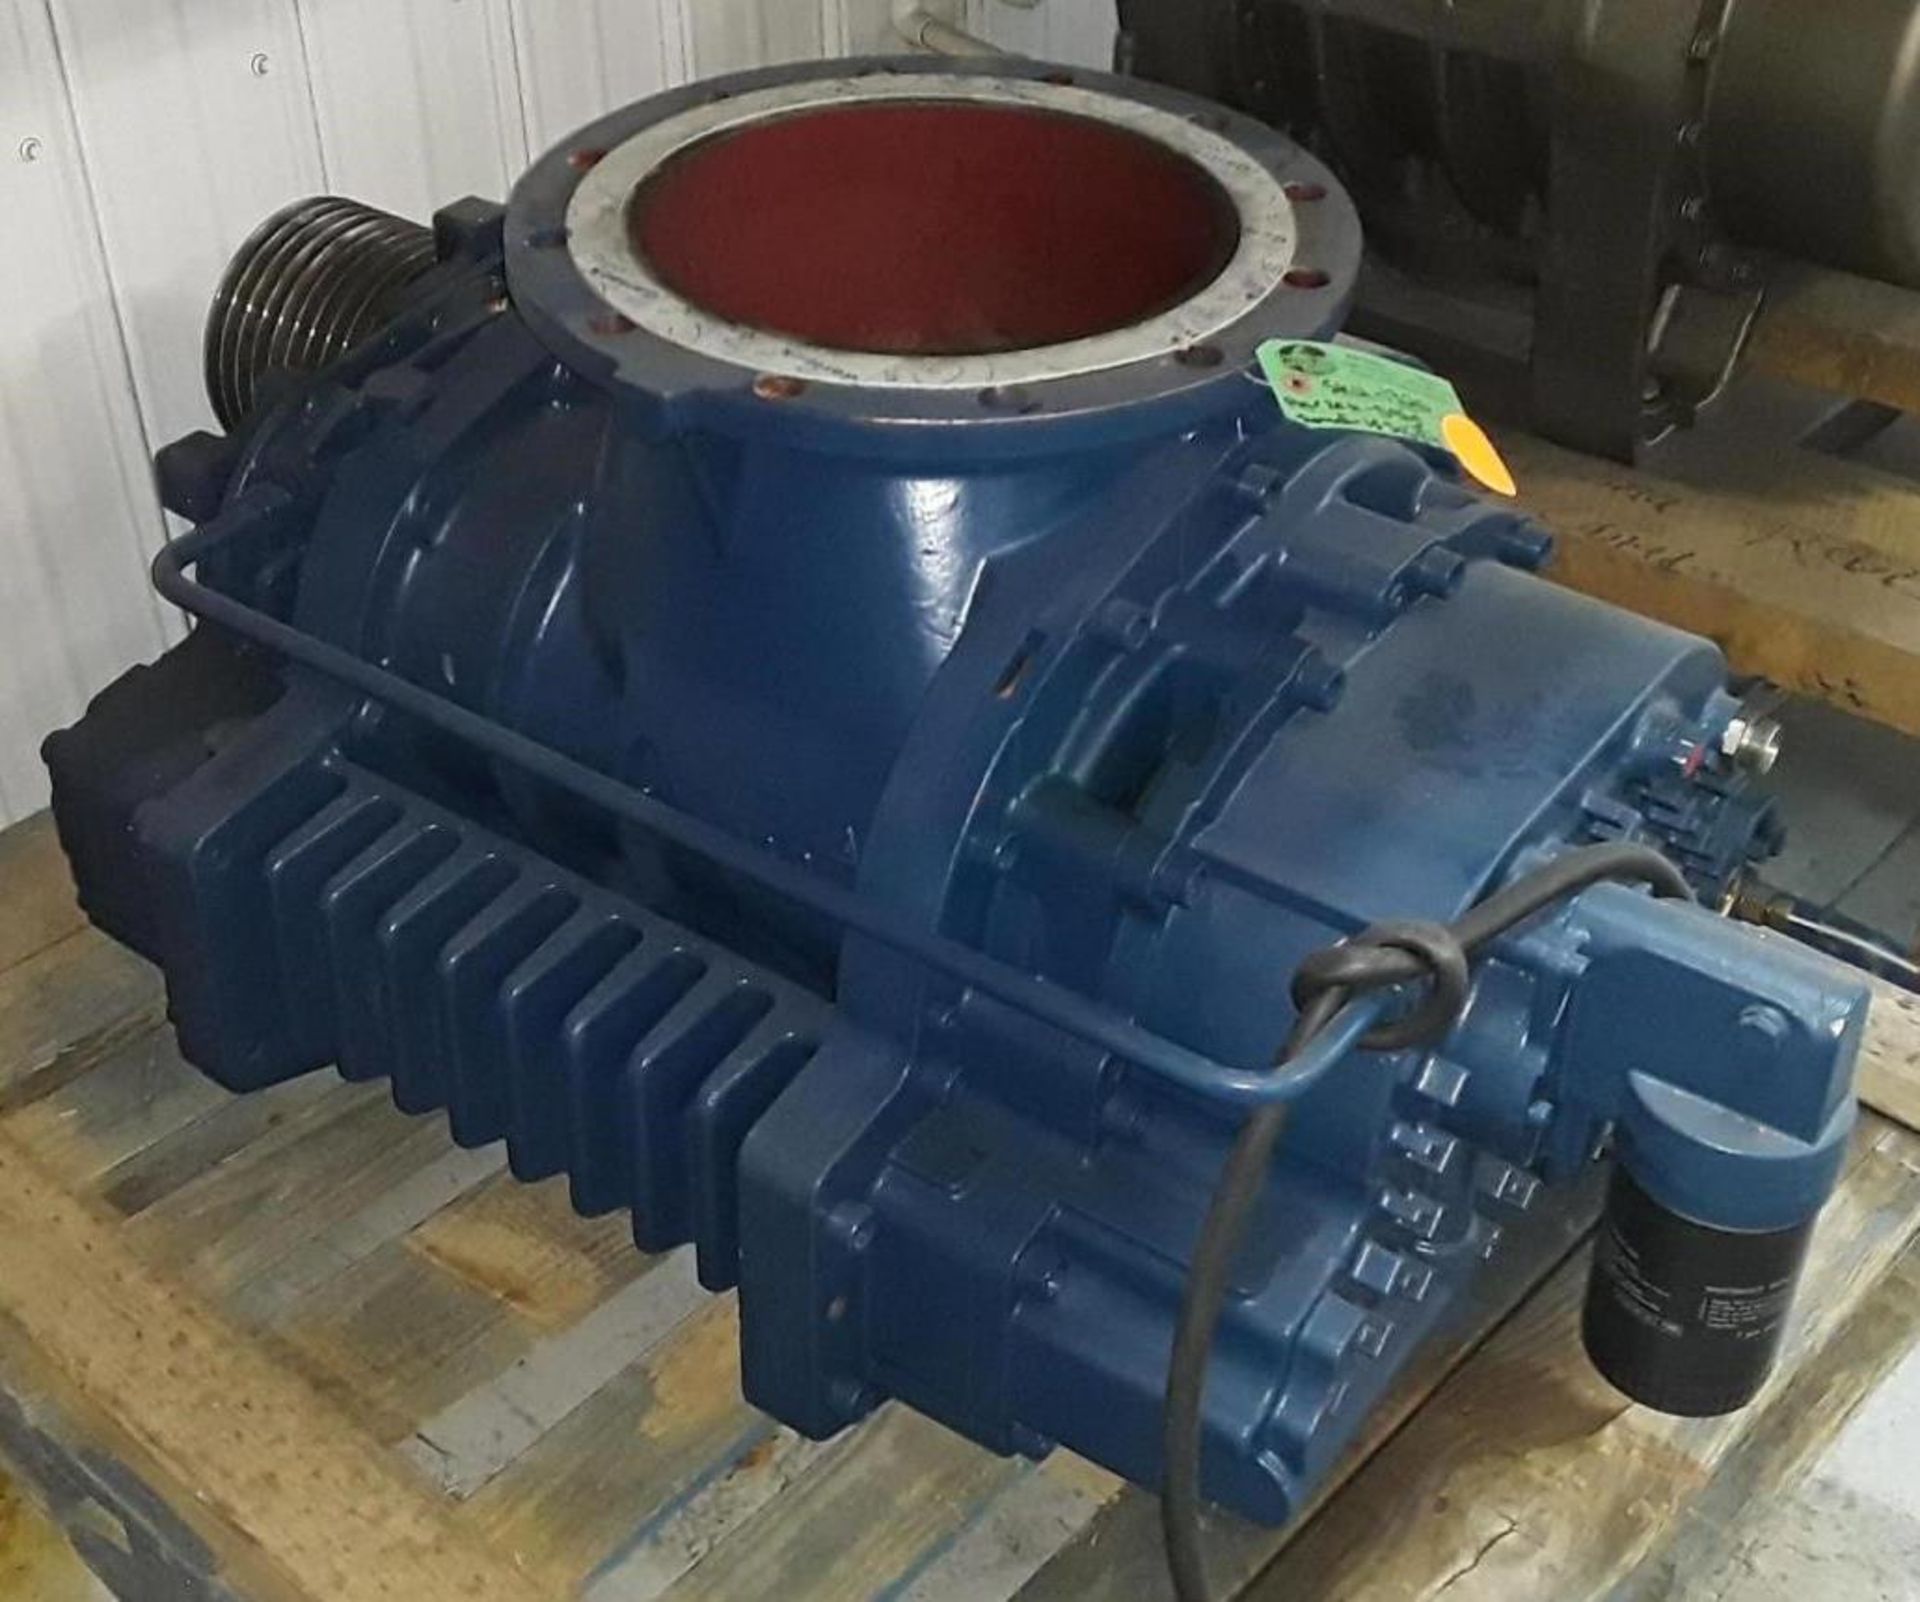 AERZEN D985 BLOWER PACKAGE (CI) [SKU 1320] (LOCATED IN DIDSBURY, AB) [RIGGING FEE FOR LOT #189 - $25